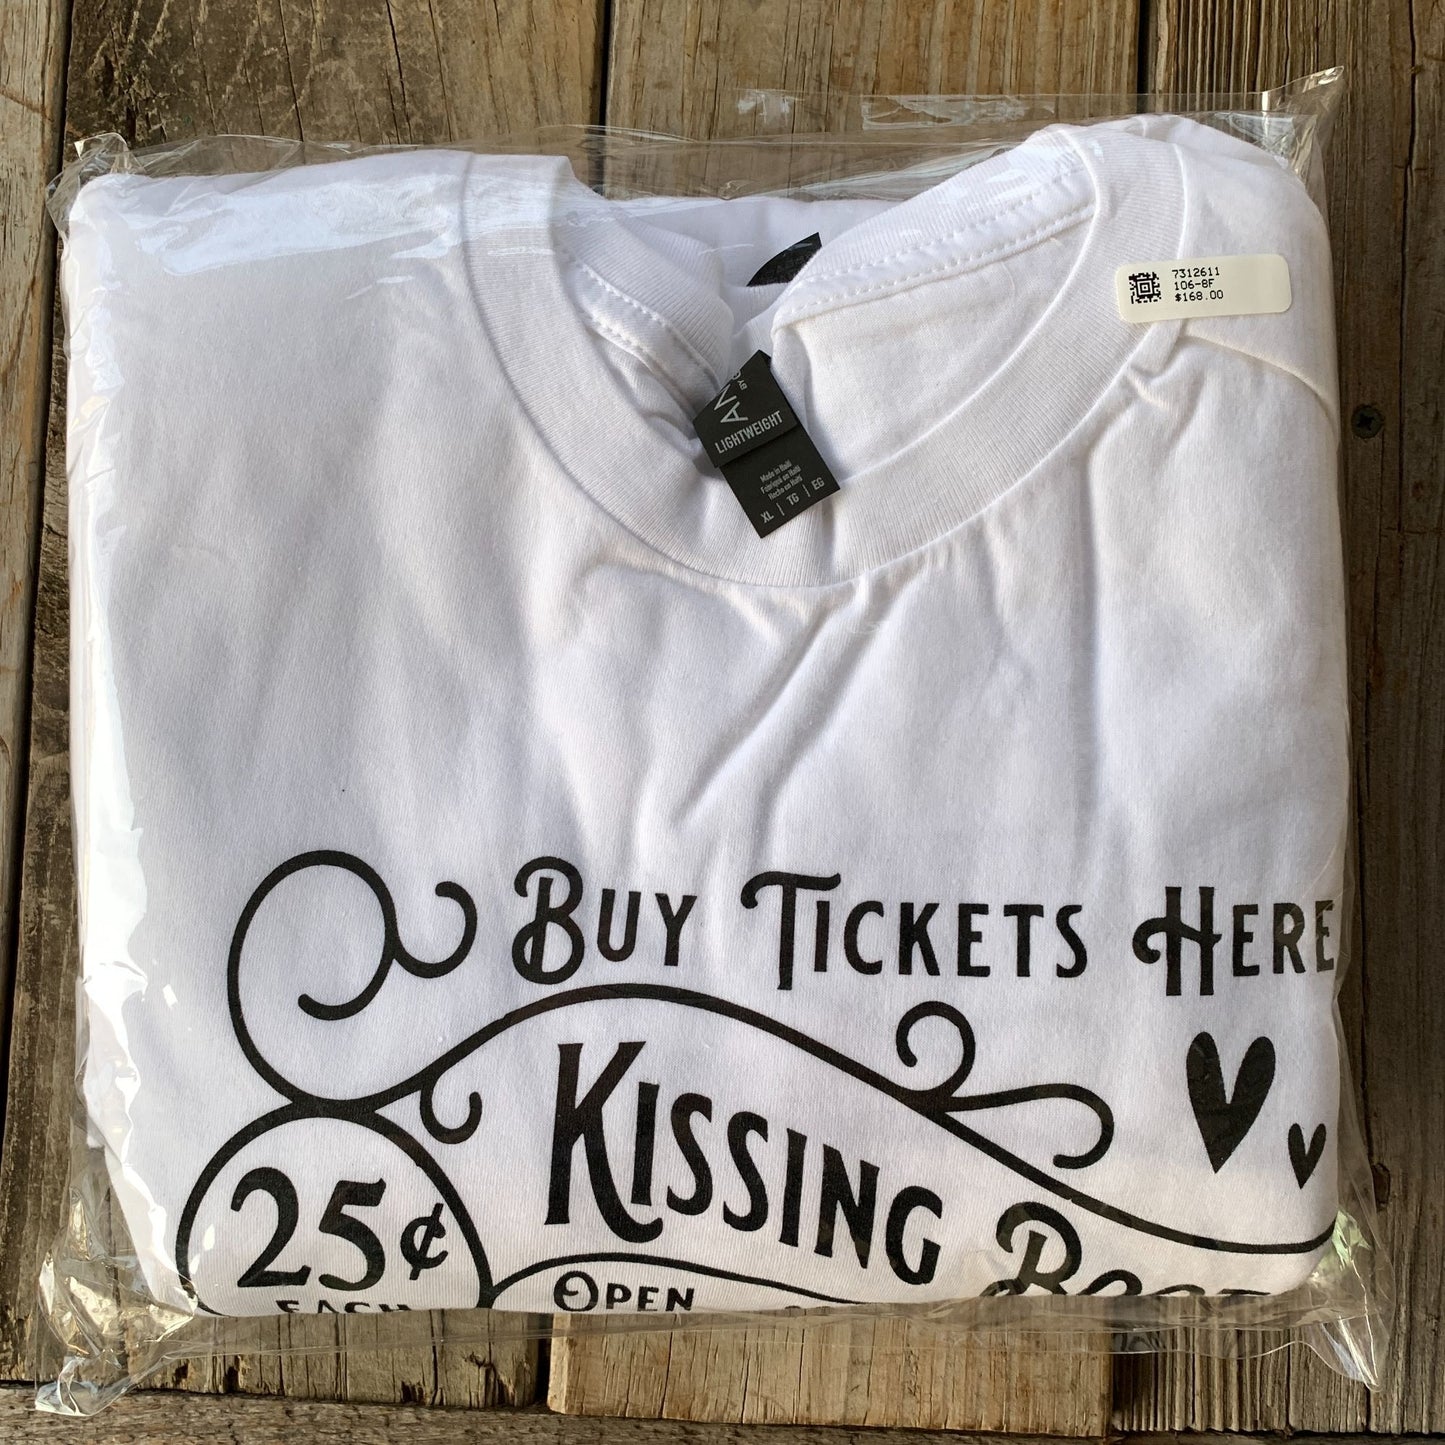 Kissing Booth Graphic Tee White